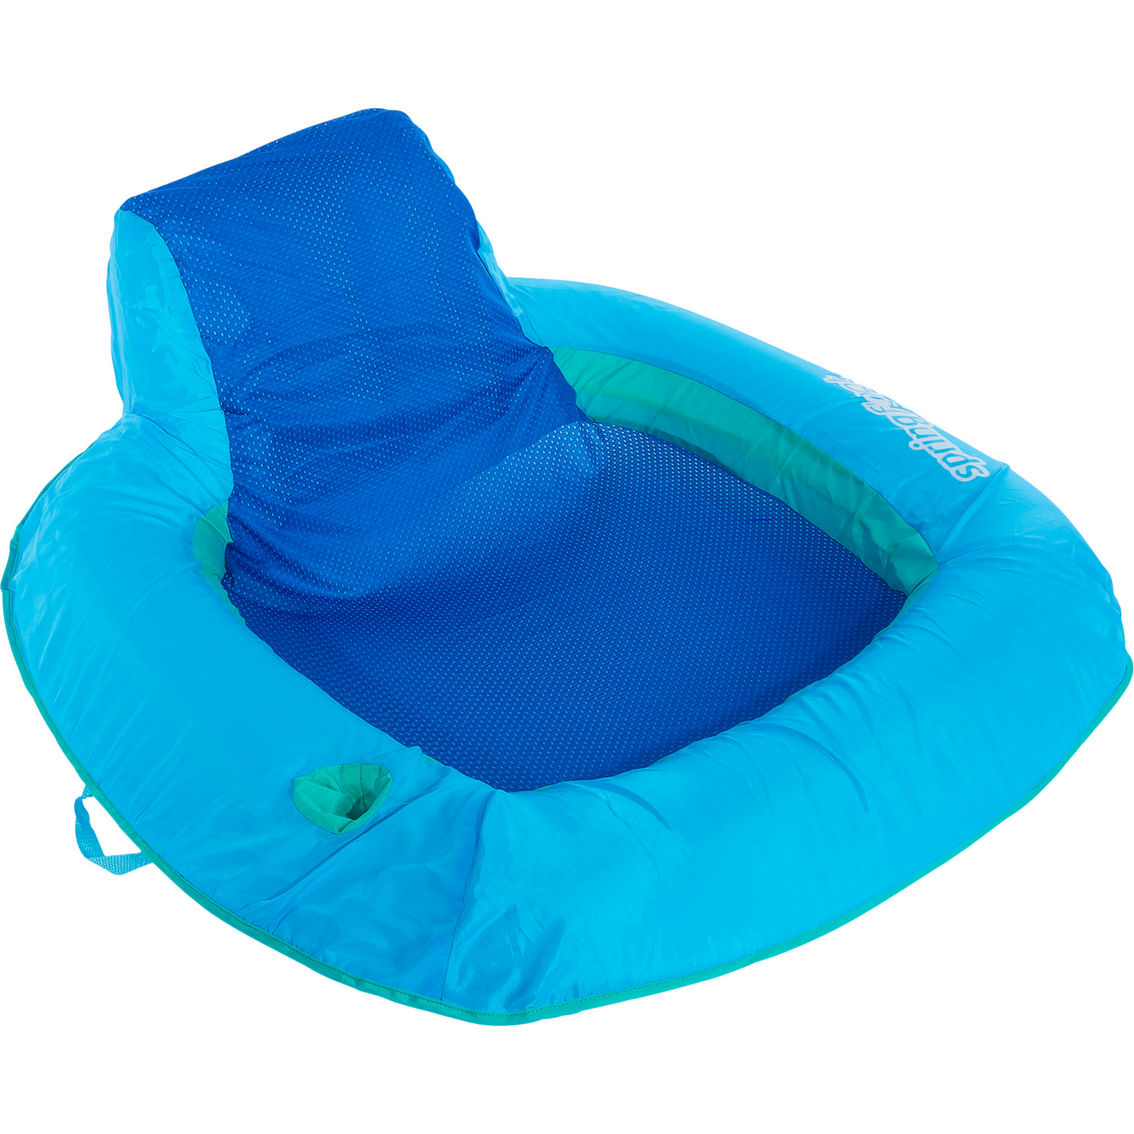 SwimWays Blue Spring Float SunSeat Floating Pool Chair - Image 2 of 2